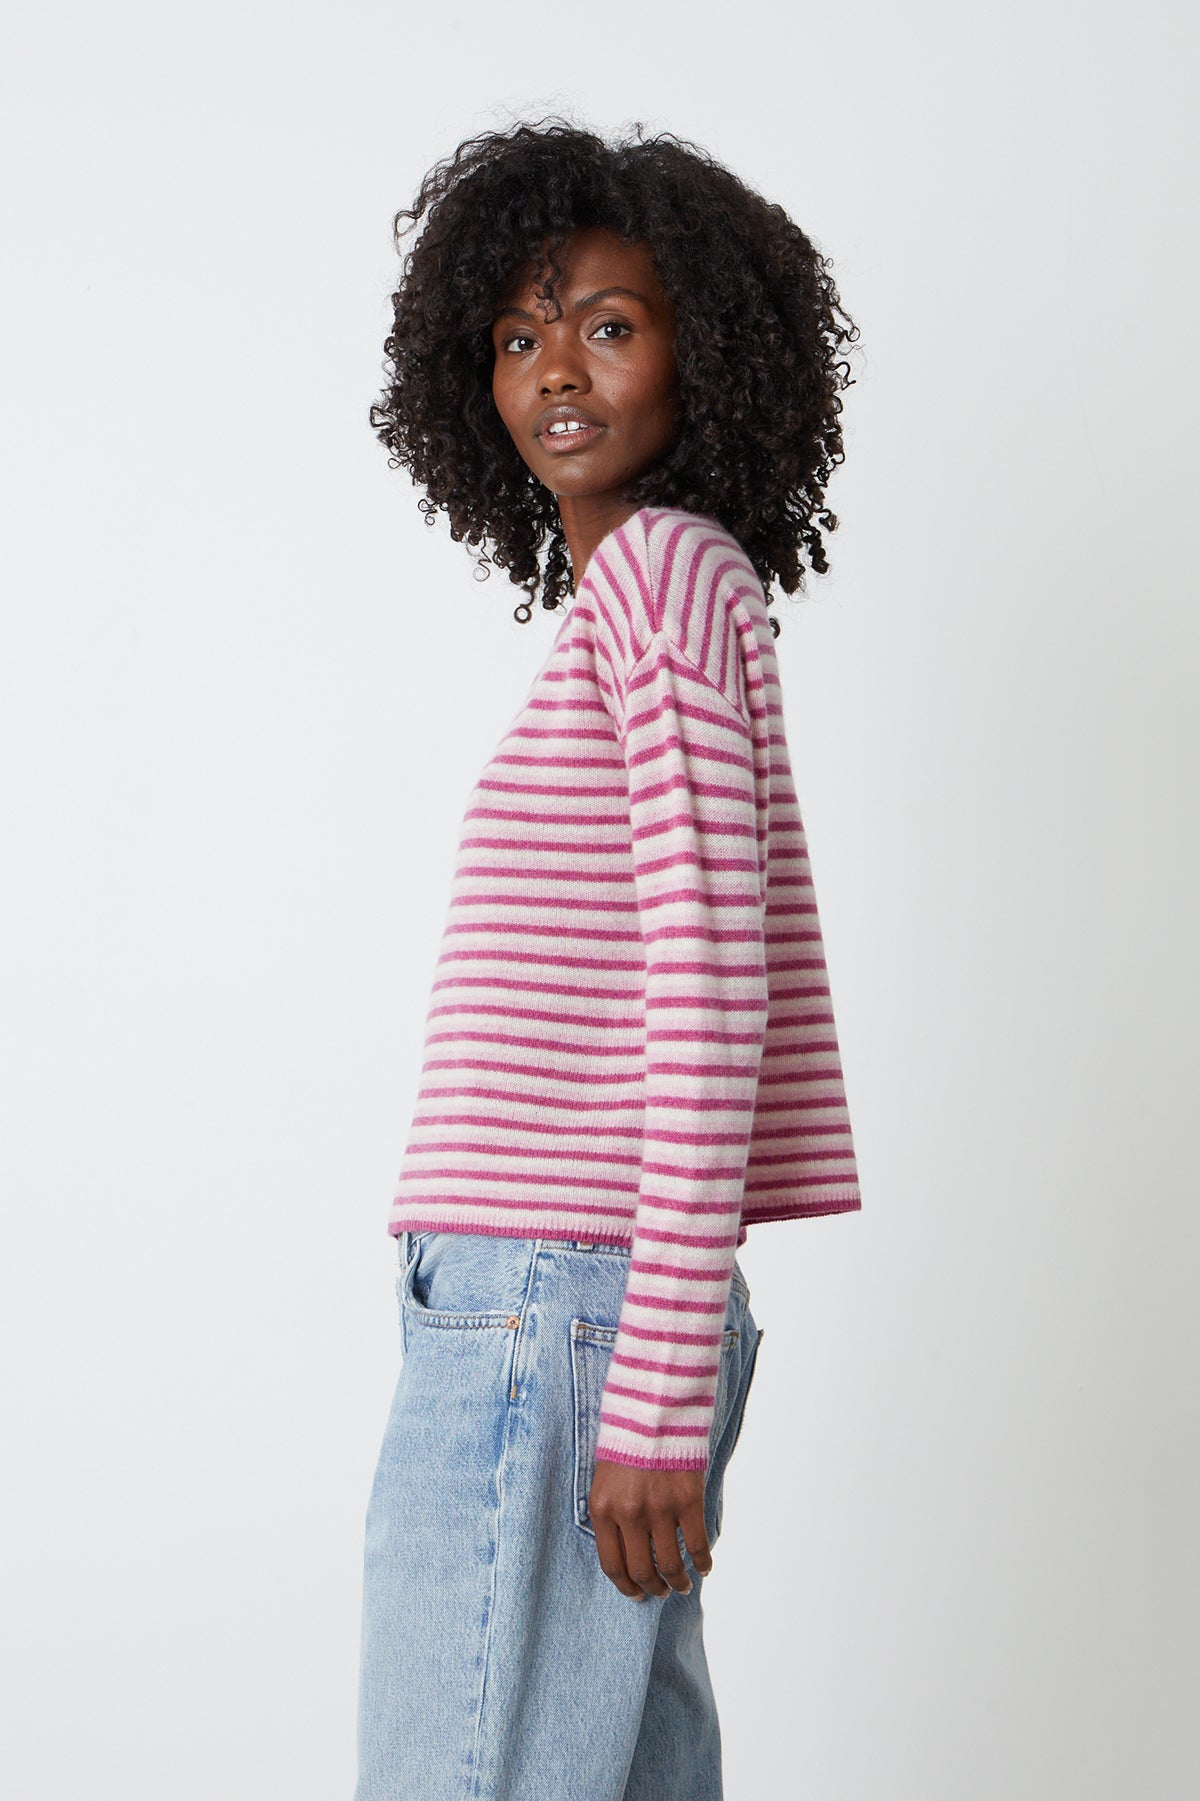   The model is wearing a Velvet by Graham & Spencer CADIE CASHMERE STRIPED SWEATER and jeans. 